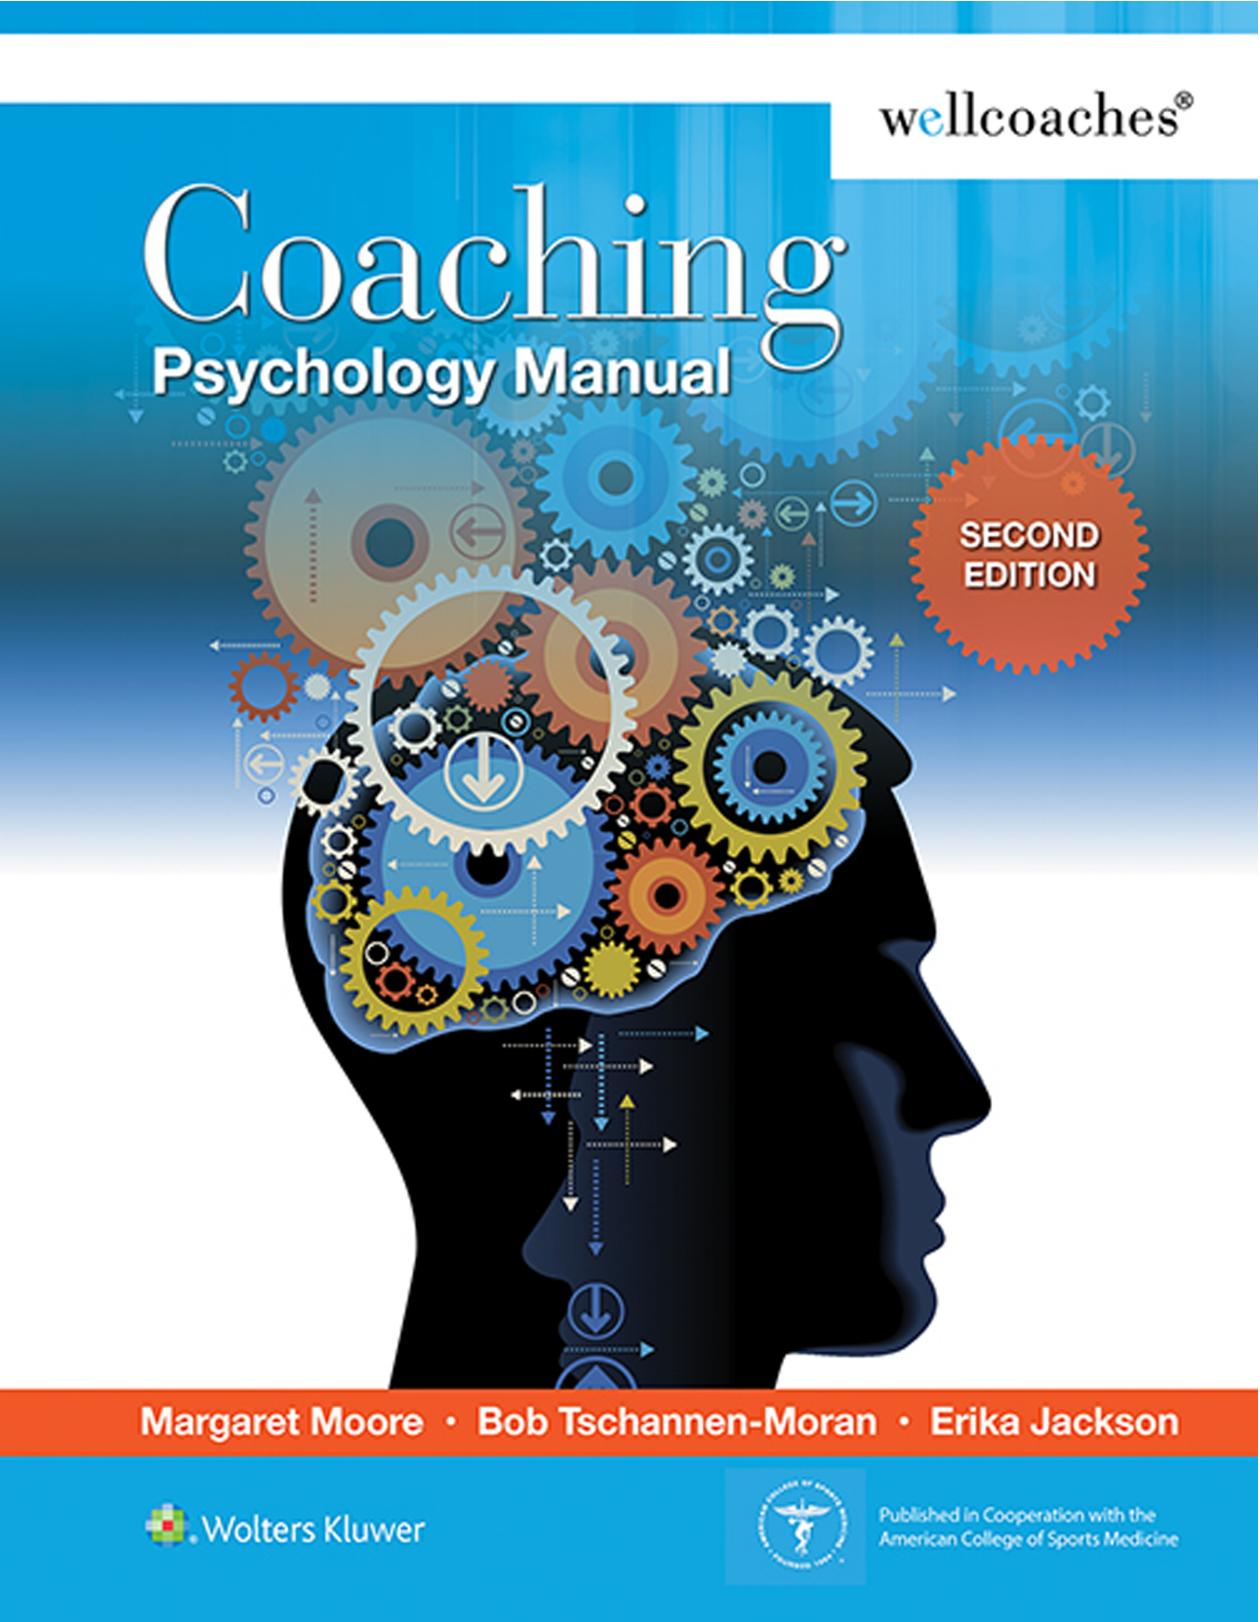 Coaching Psychology Manual, Second Edition